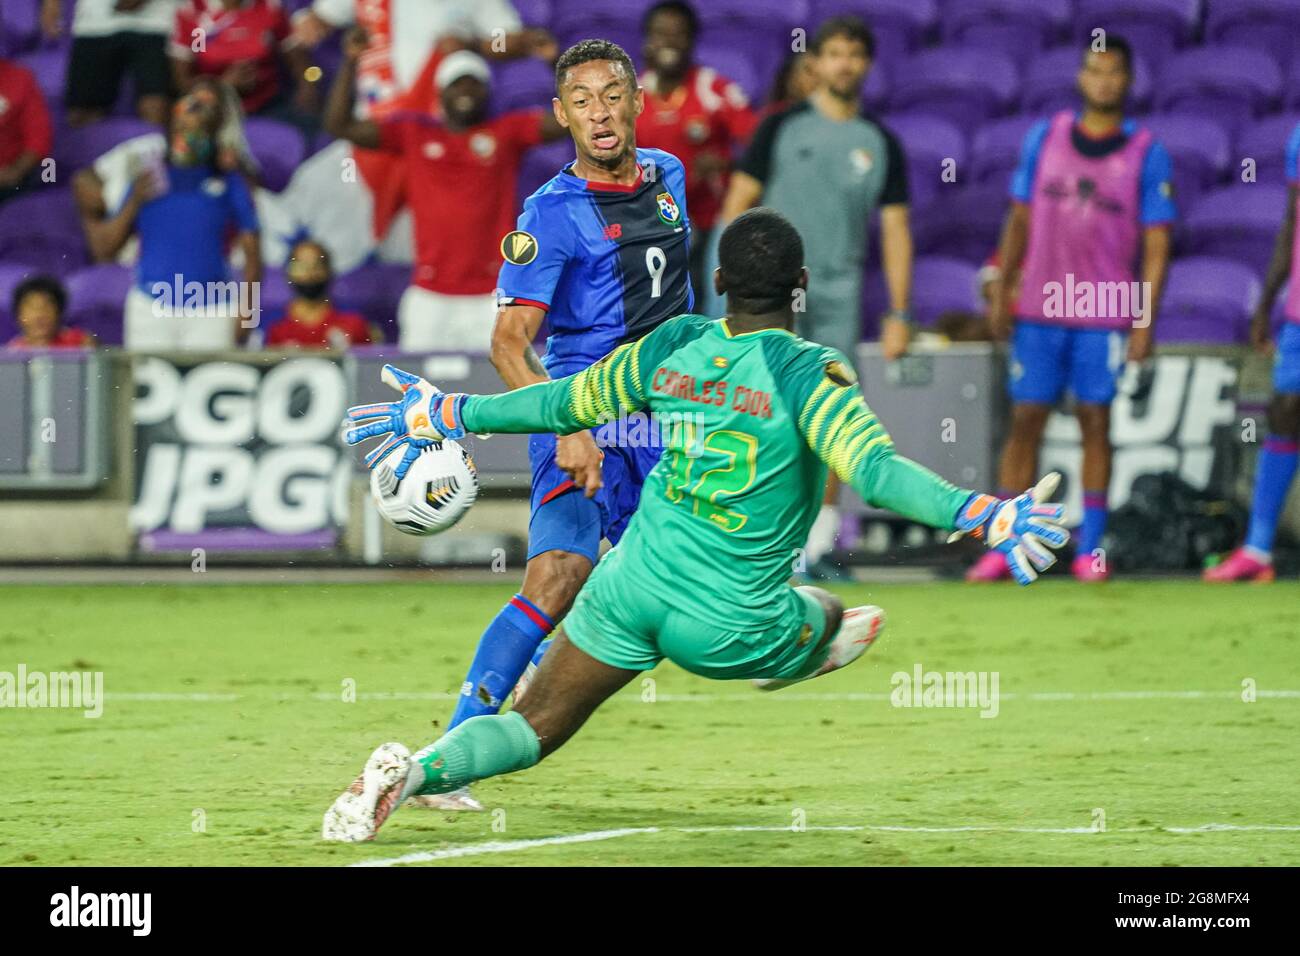 Orlando, Florida, USA, July 20, 2021, Panama forward Gabriel Torres #9 attempt to score during the Concacaf Gold Cup at Exploria Stadium.  (Photo Credit:  Marty Jean-Louis) Stock Photo